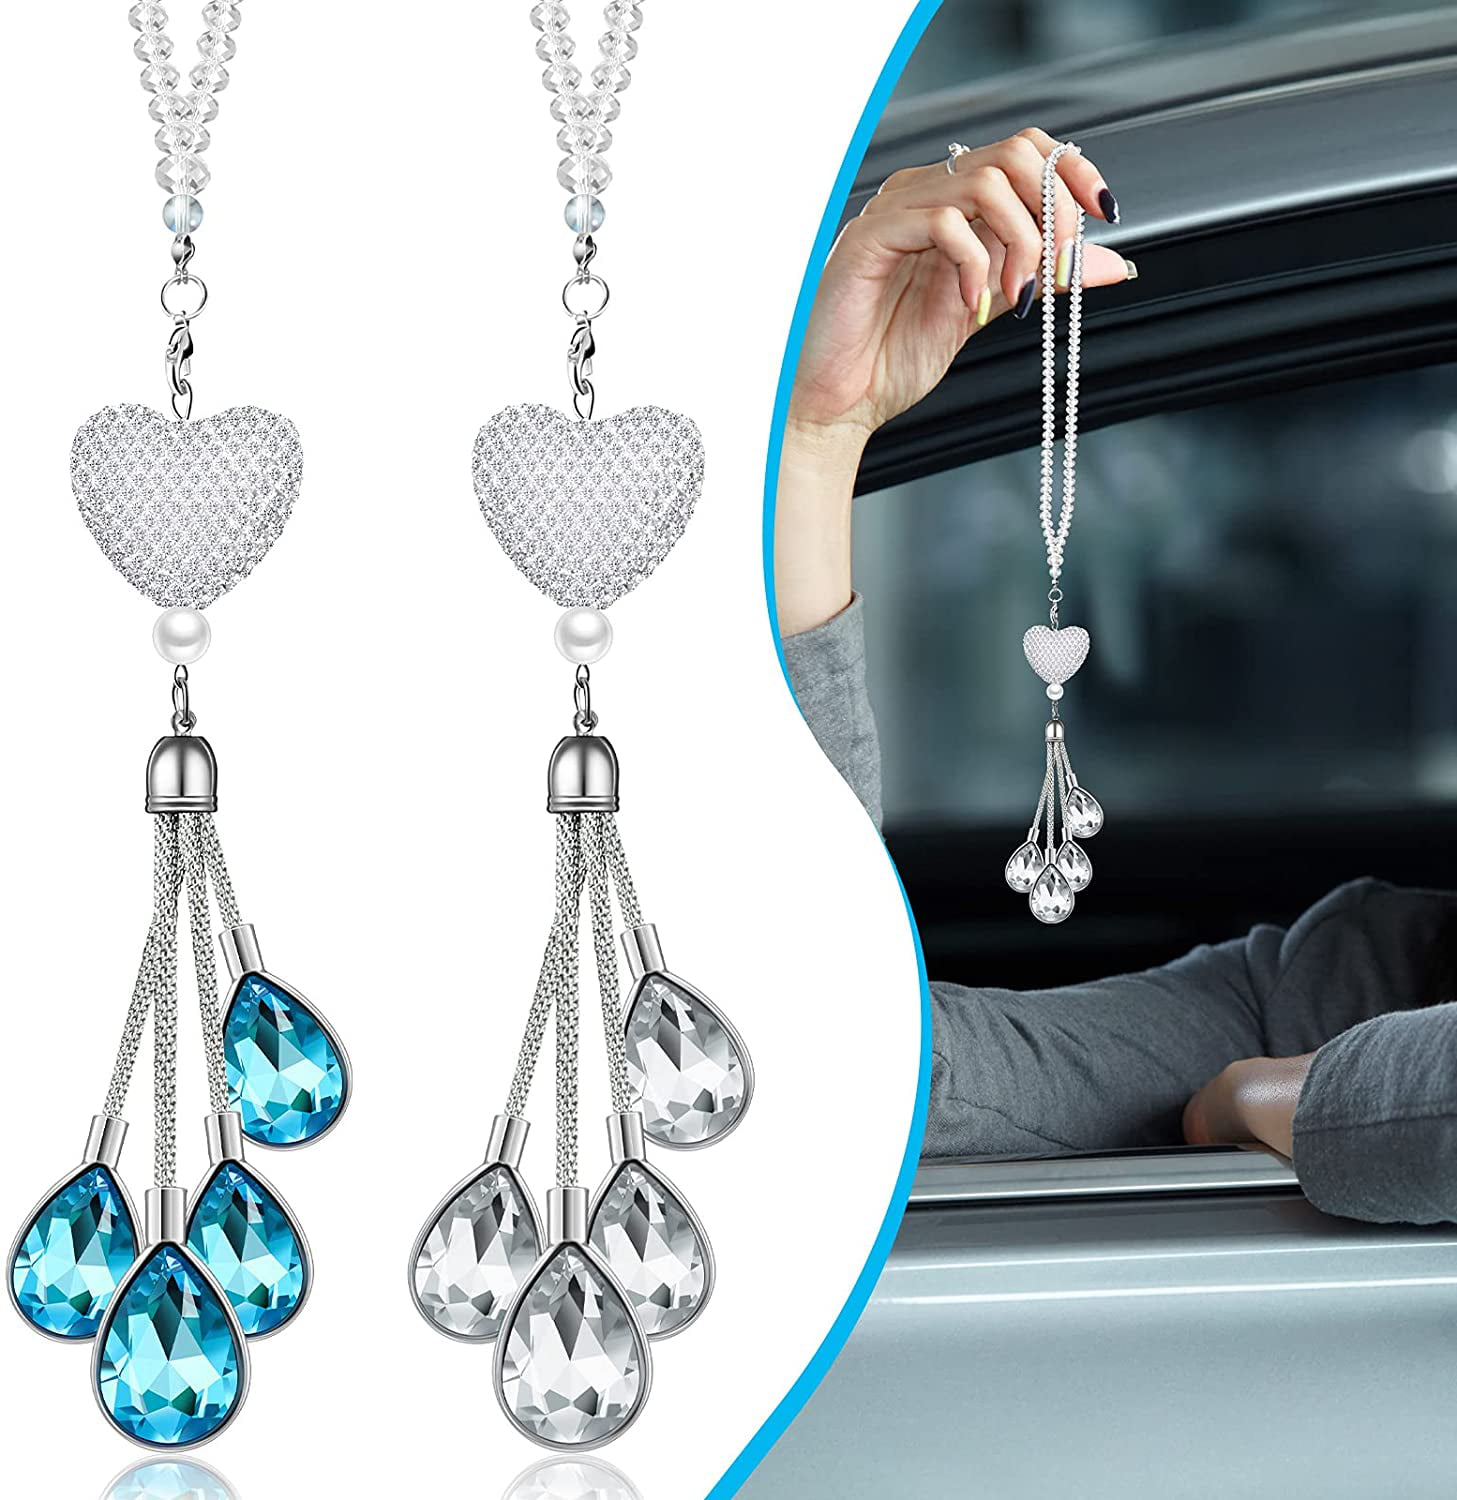 Crystal Car Rear View Mirror Charms Car Decoration Decor Lucky Hanging Interior Ornament Pendant Sun Catch Car Mirror Accessories for Women and Men 2 Pieces Bling White Heart Diamond Car Accessories